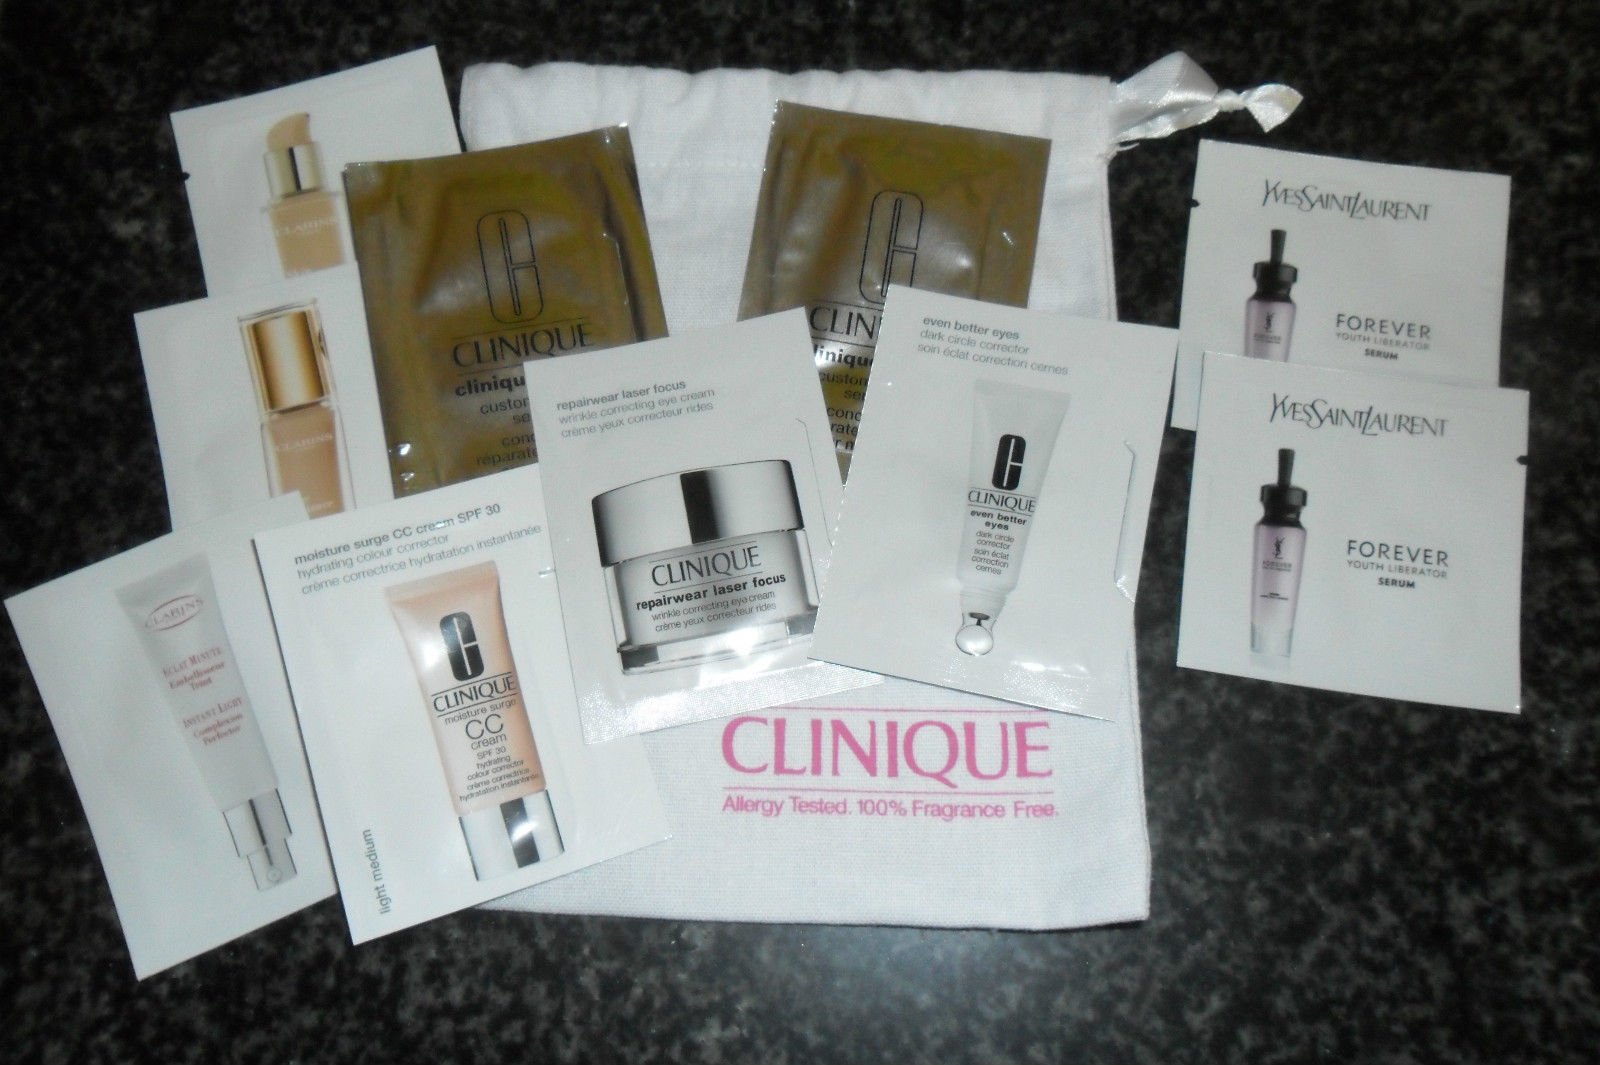 Clarins-Clinique-Eyes-YSL-Youth-Serum-Foundation-Skincare-samples